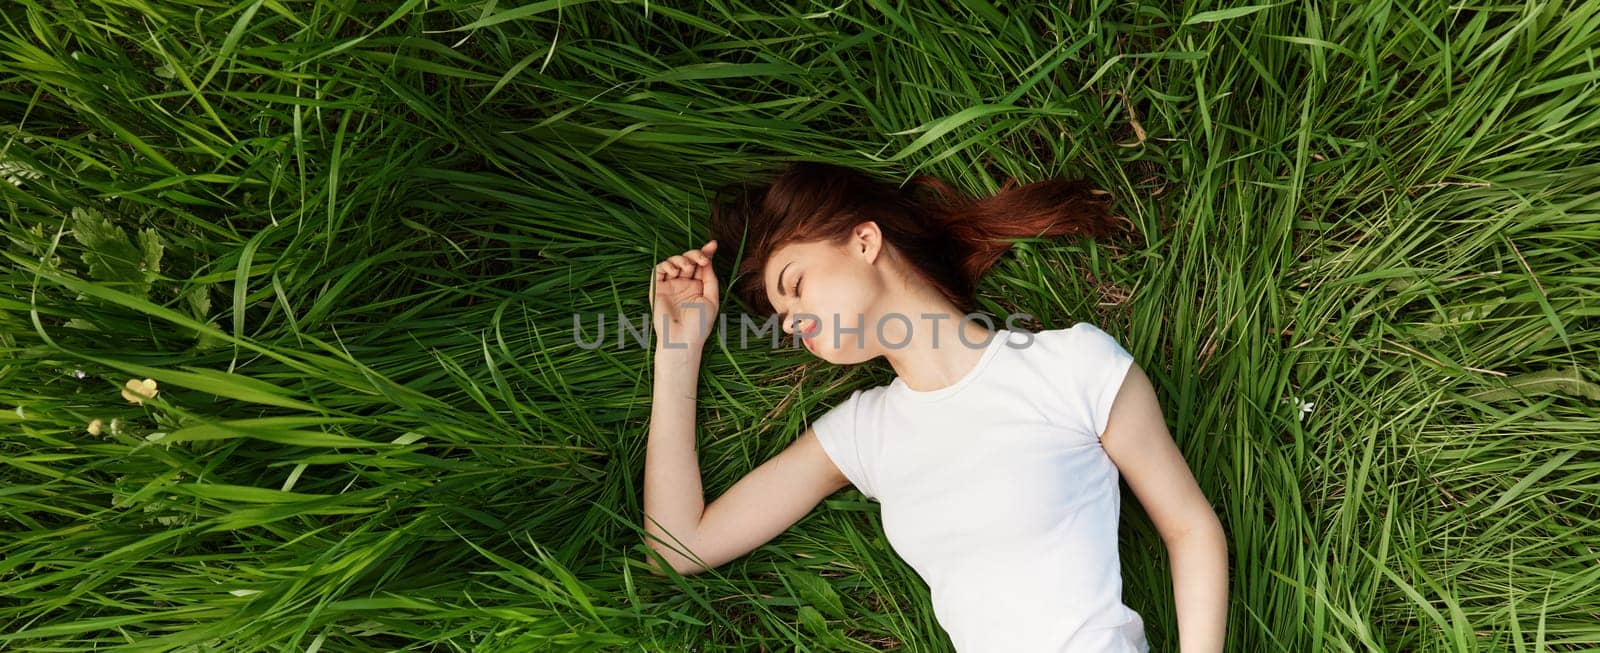 peaceful, happy woman lies in green tall grass by Vichizh